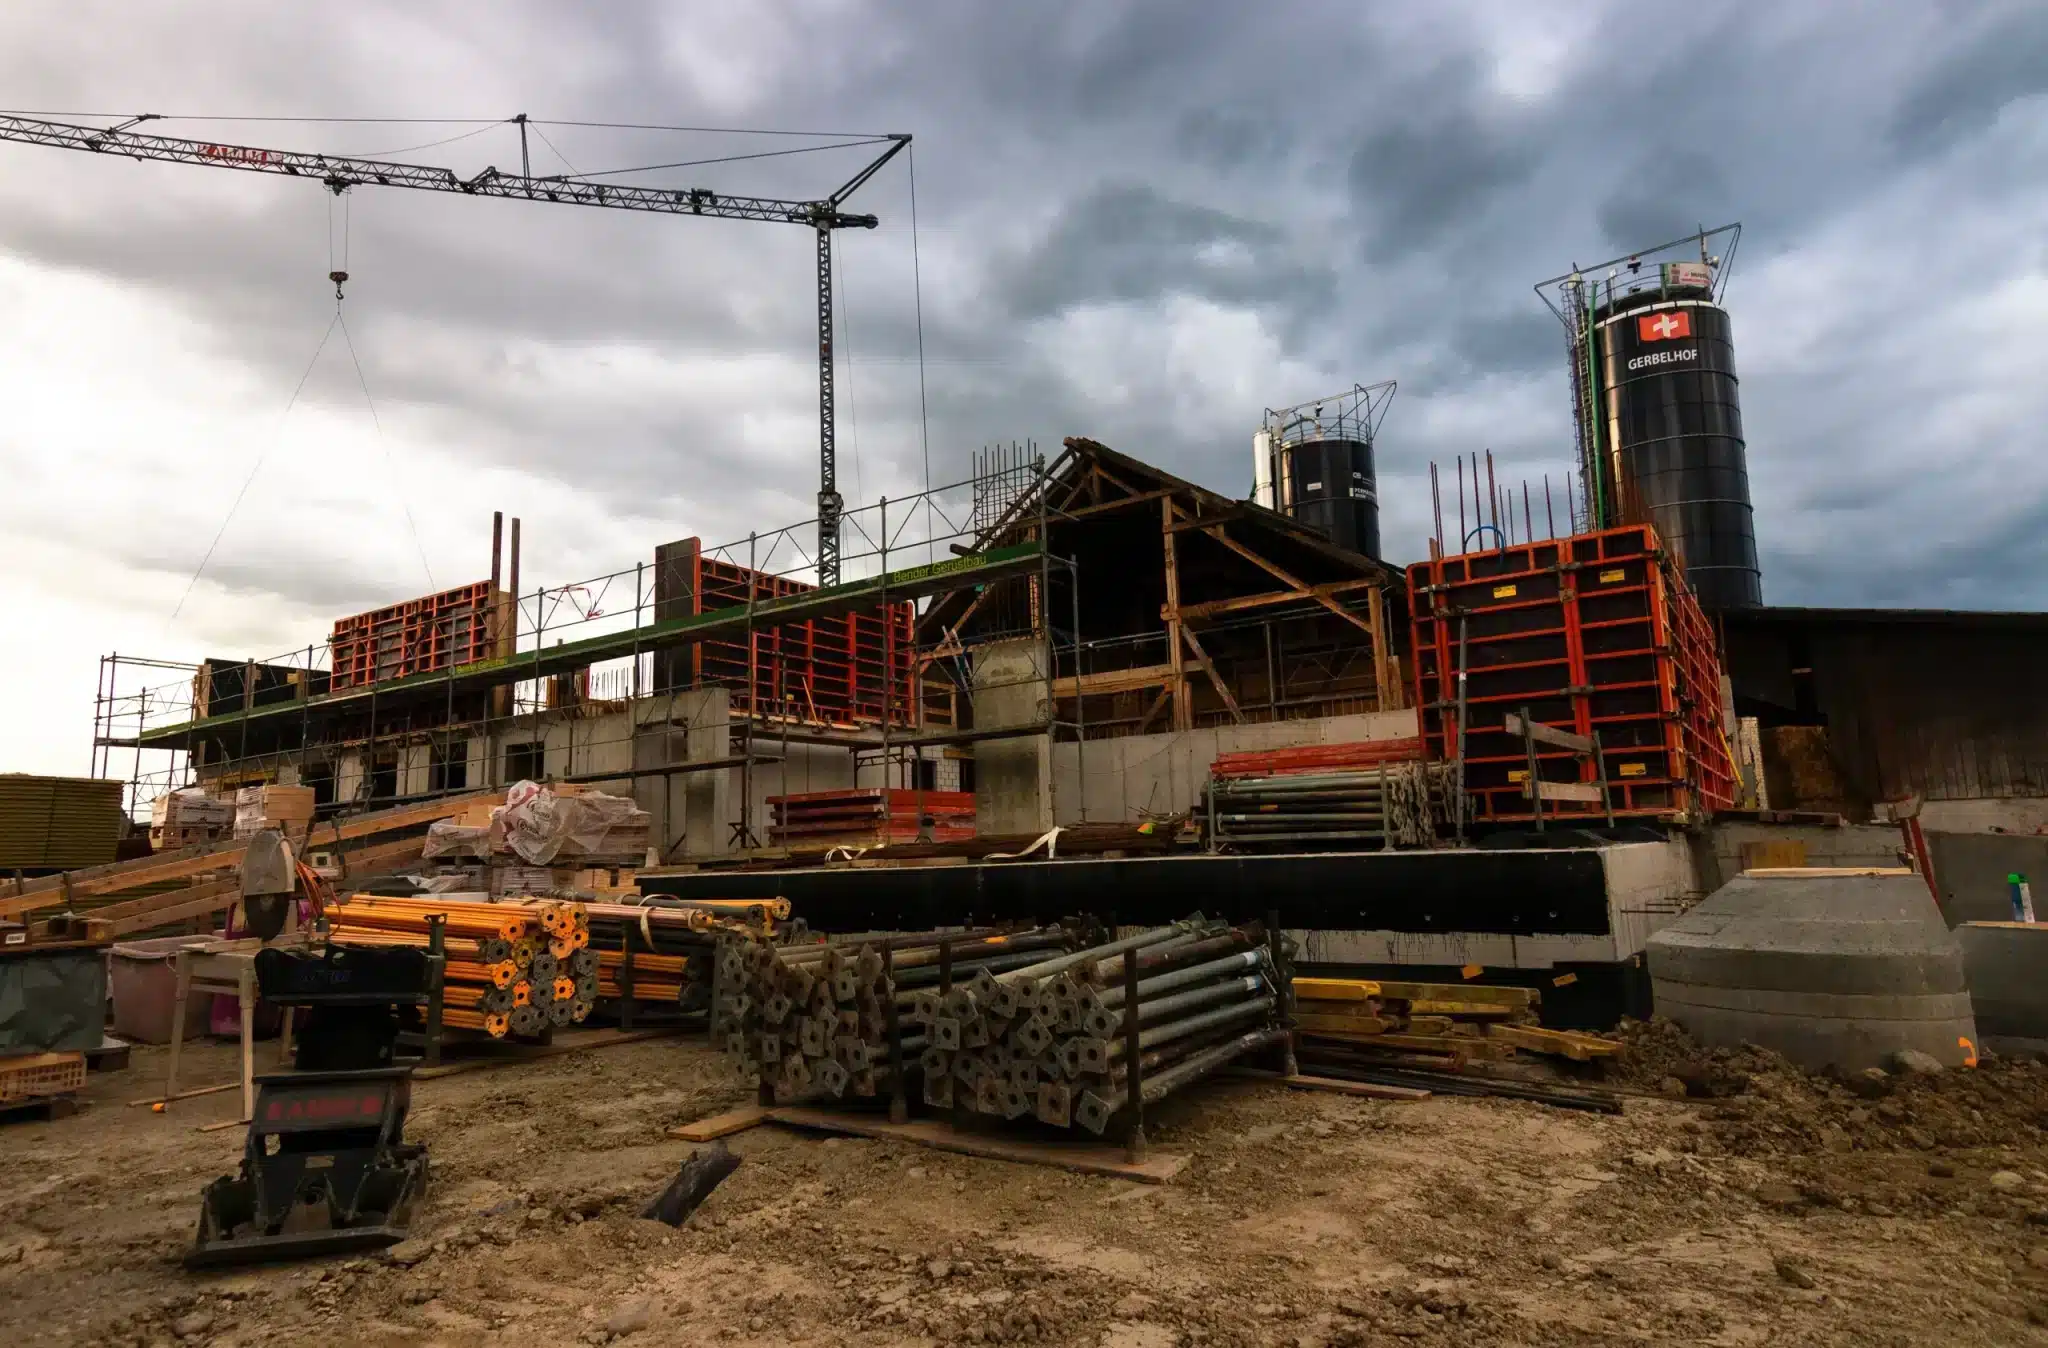 A construction site under a moody sky, with a large crane towering above and various building materials strewn about. The skeleton of a building with orange and red formwork is taking shape, with concrete silos emblazoned with the Swiss flag in the background.